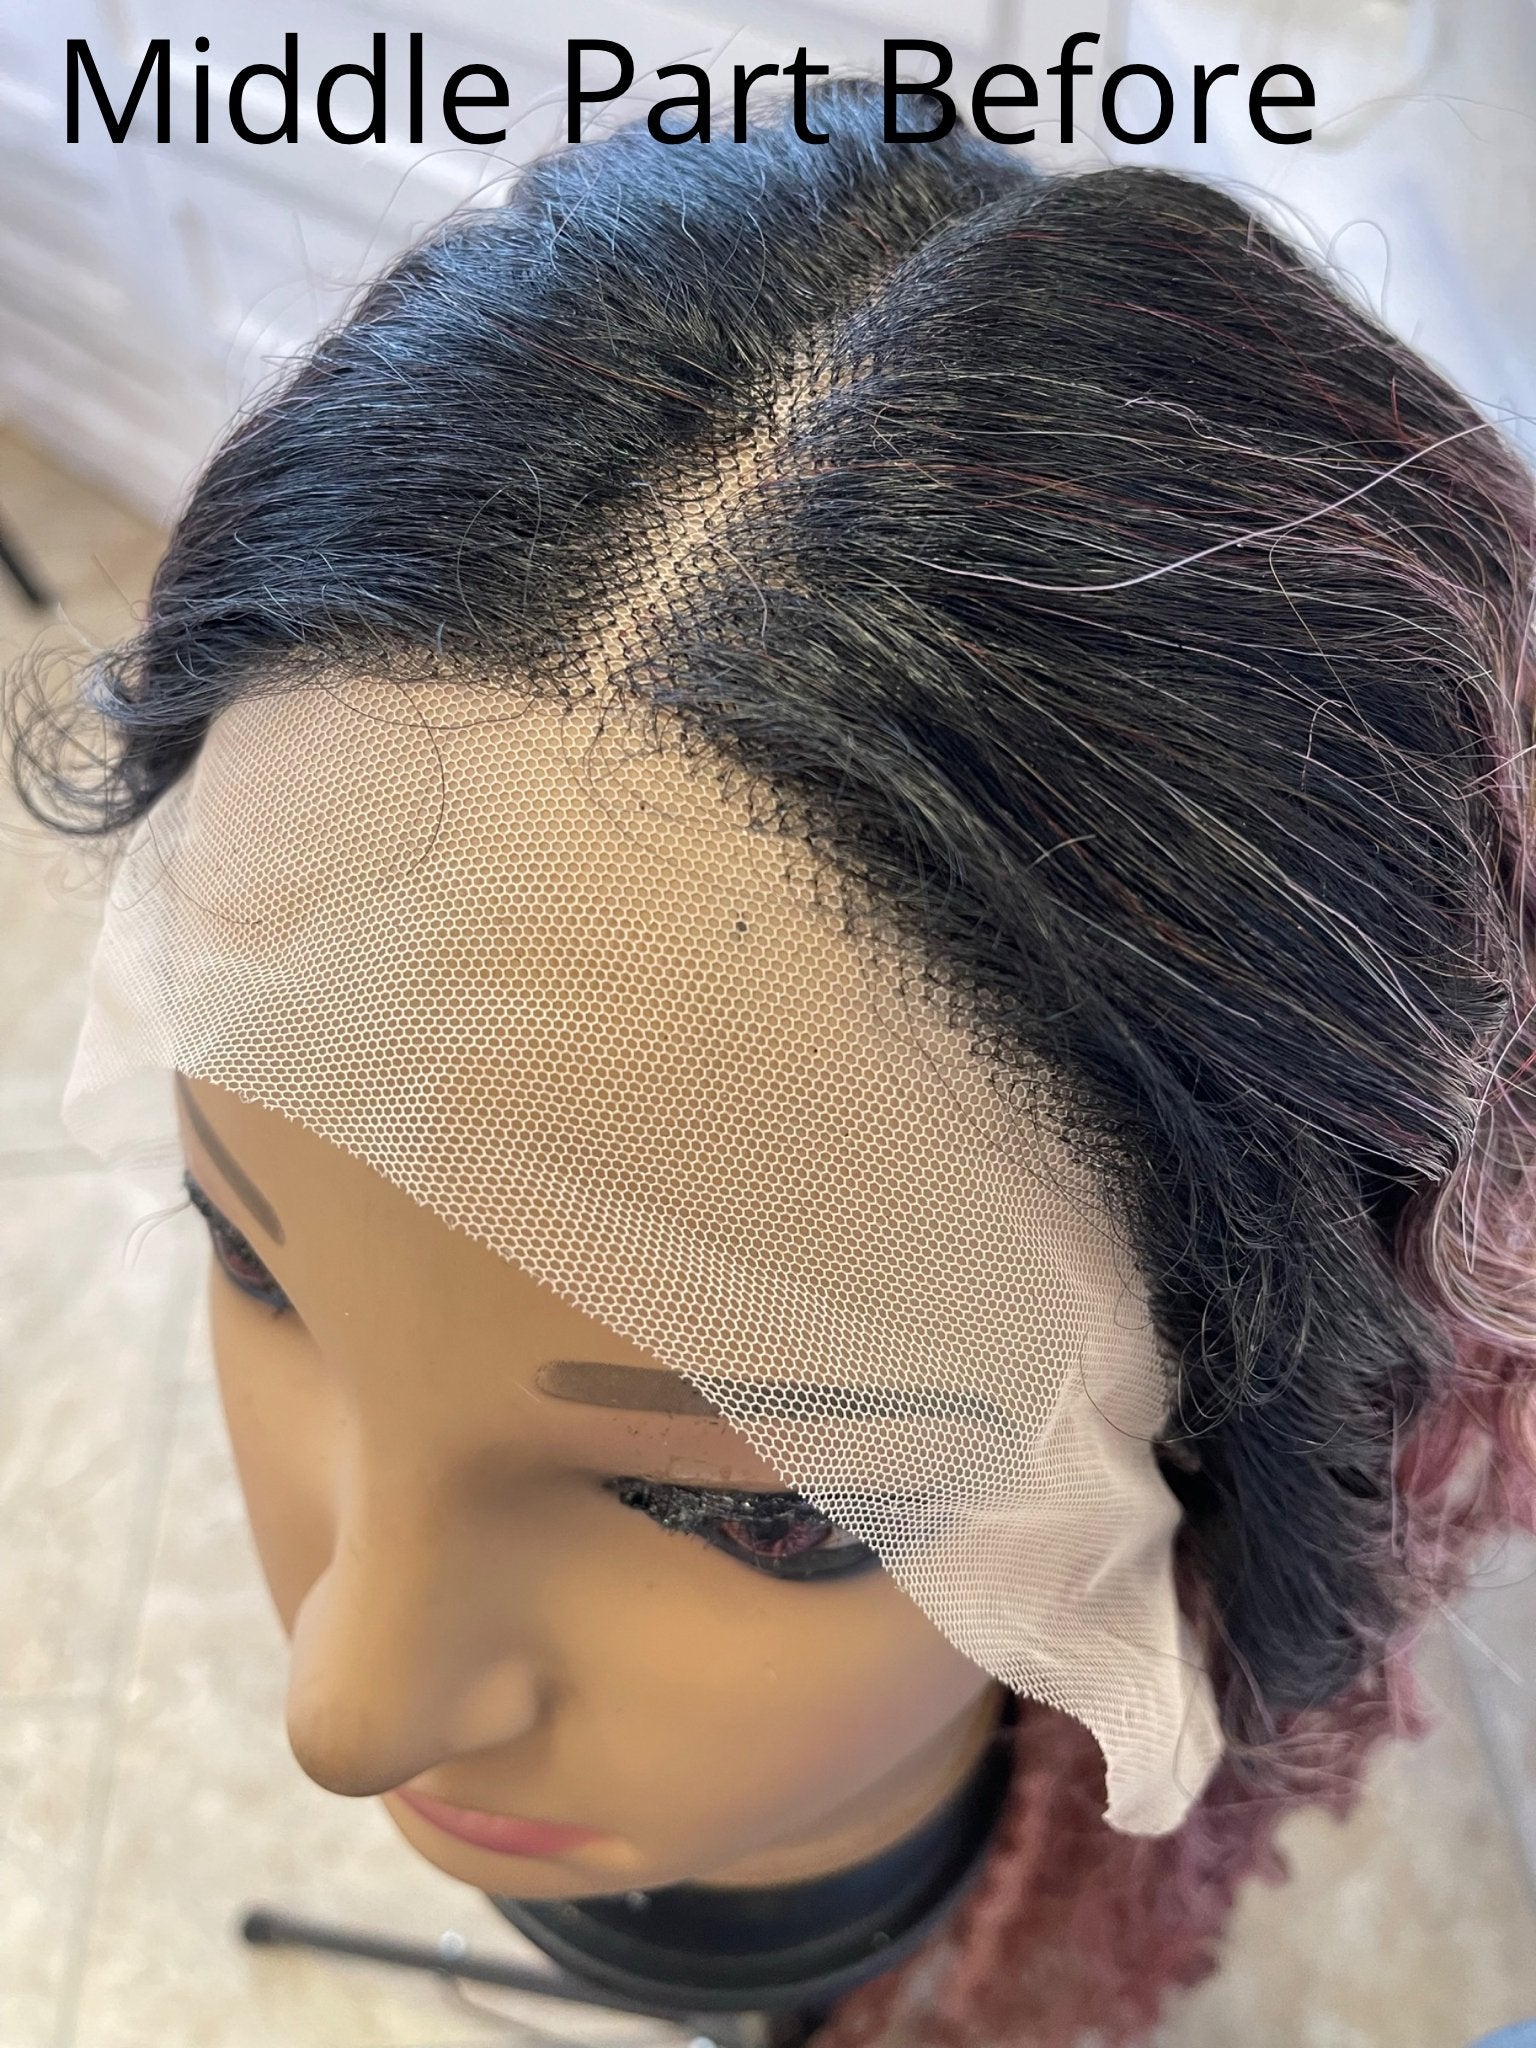 Lace Removal & Plucking Service - DaizyKat Cosmetics Lace Removal & Plucking Service DaizyKat Cosmetics Wig Services